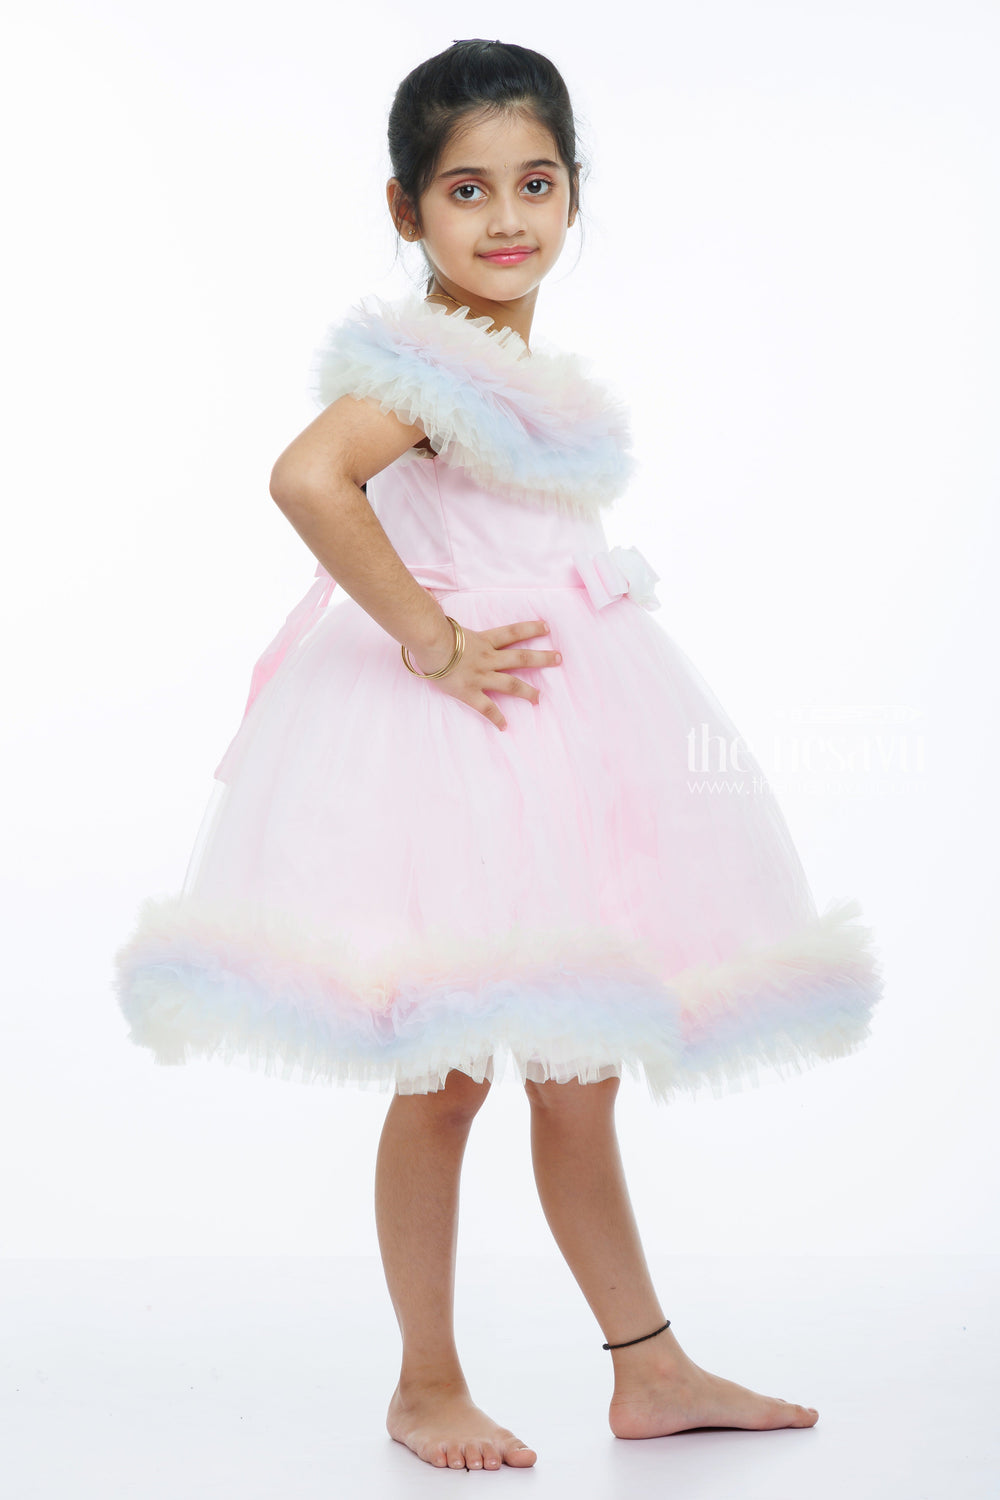 The Nesavu Girls Tutu Frock Pastel Dream Tulle Party Gown for Girls: Enchanting Elegance Nesavu Buy Girls Fancy Tulle Party Gown | Elegant Pastel Dress for Special Occasions | The Nesavu